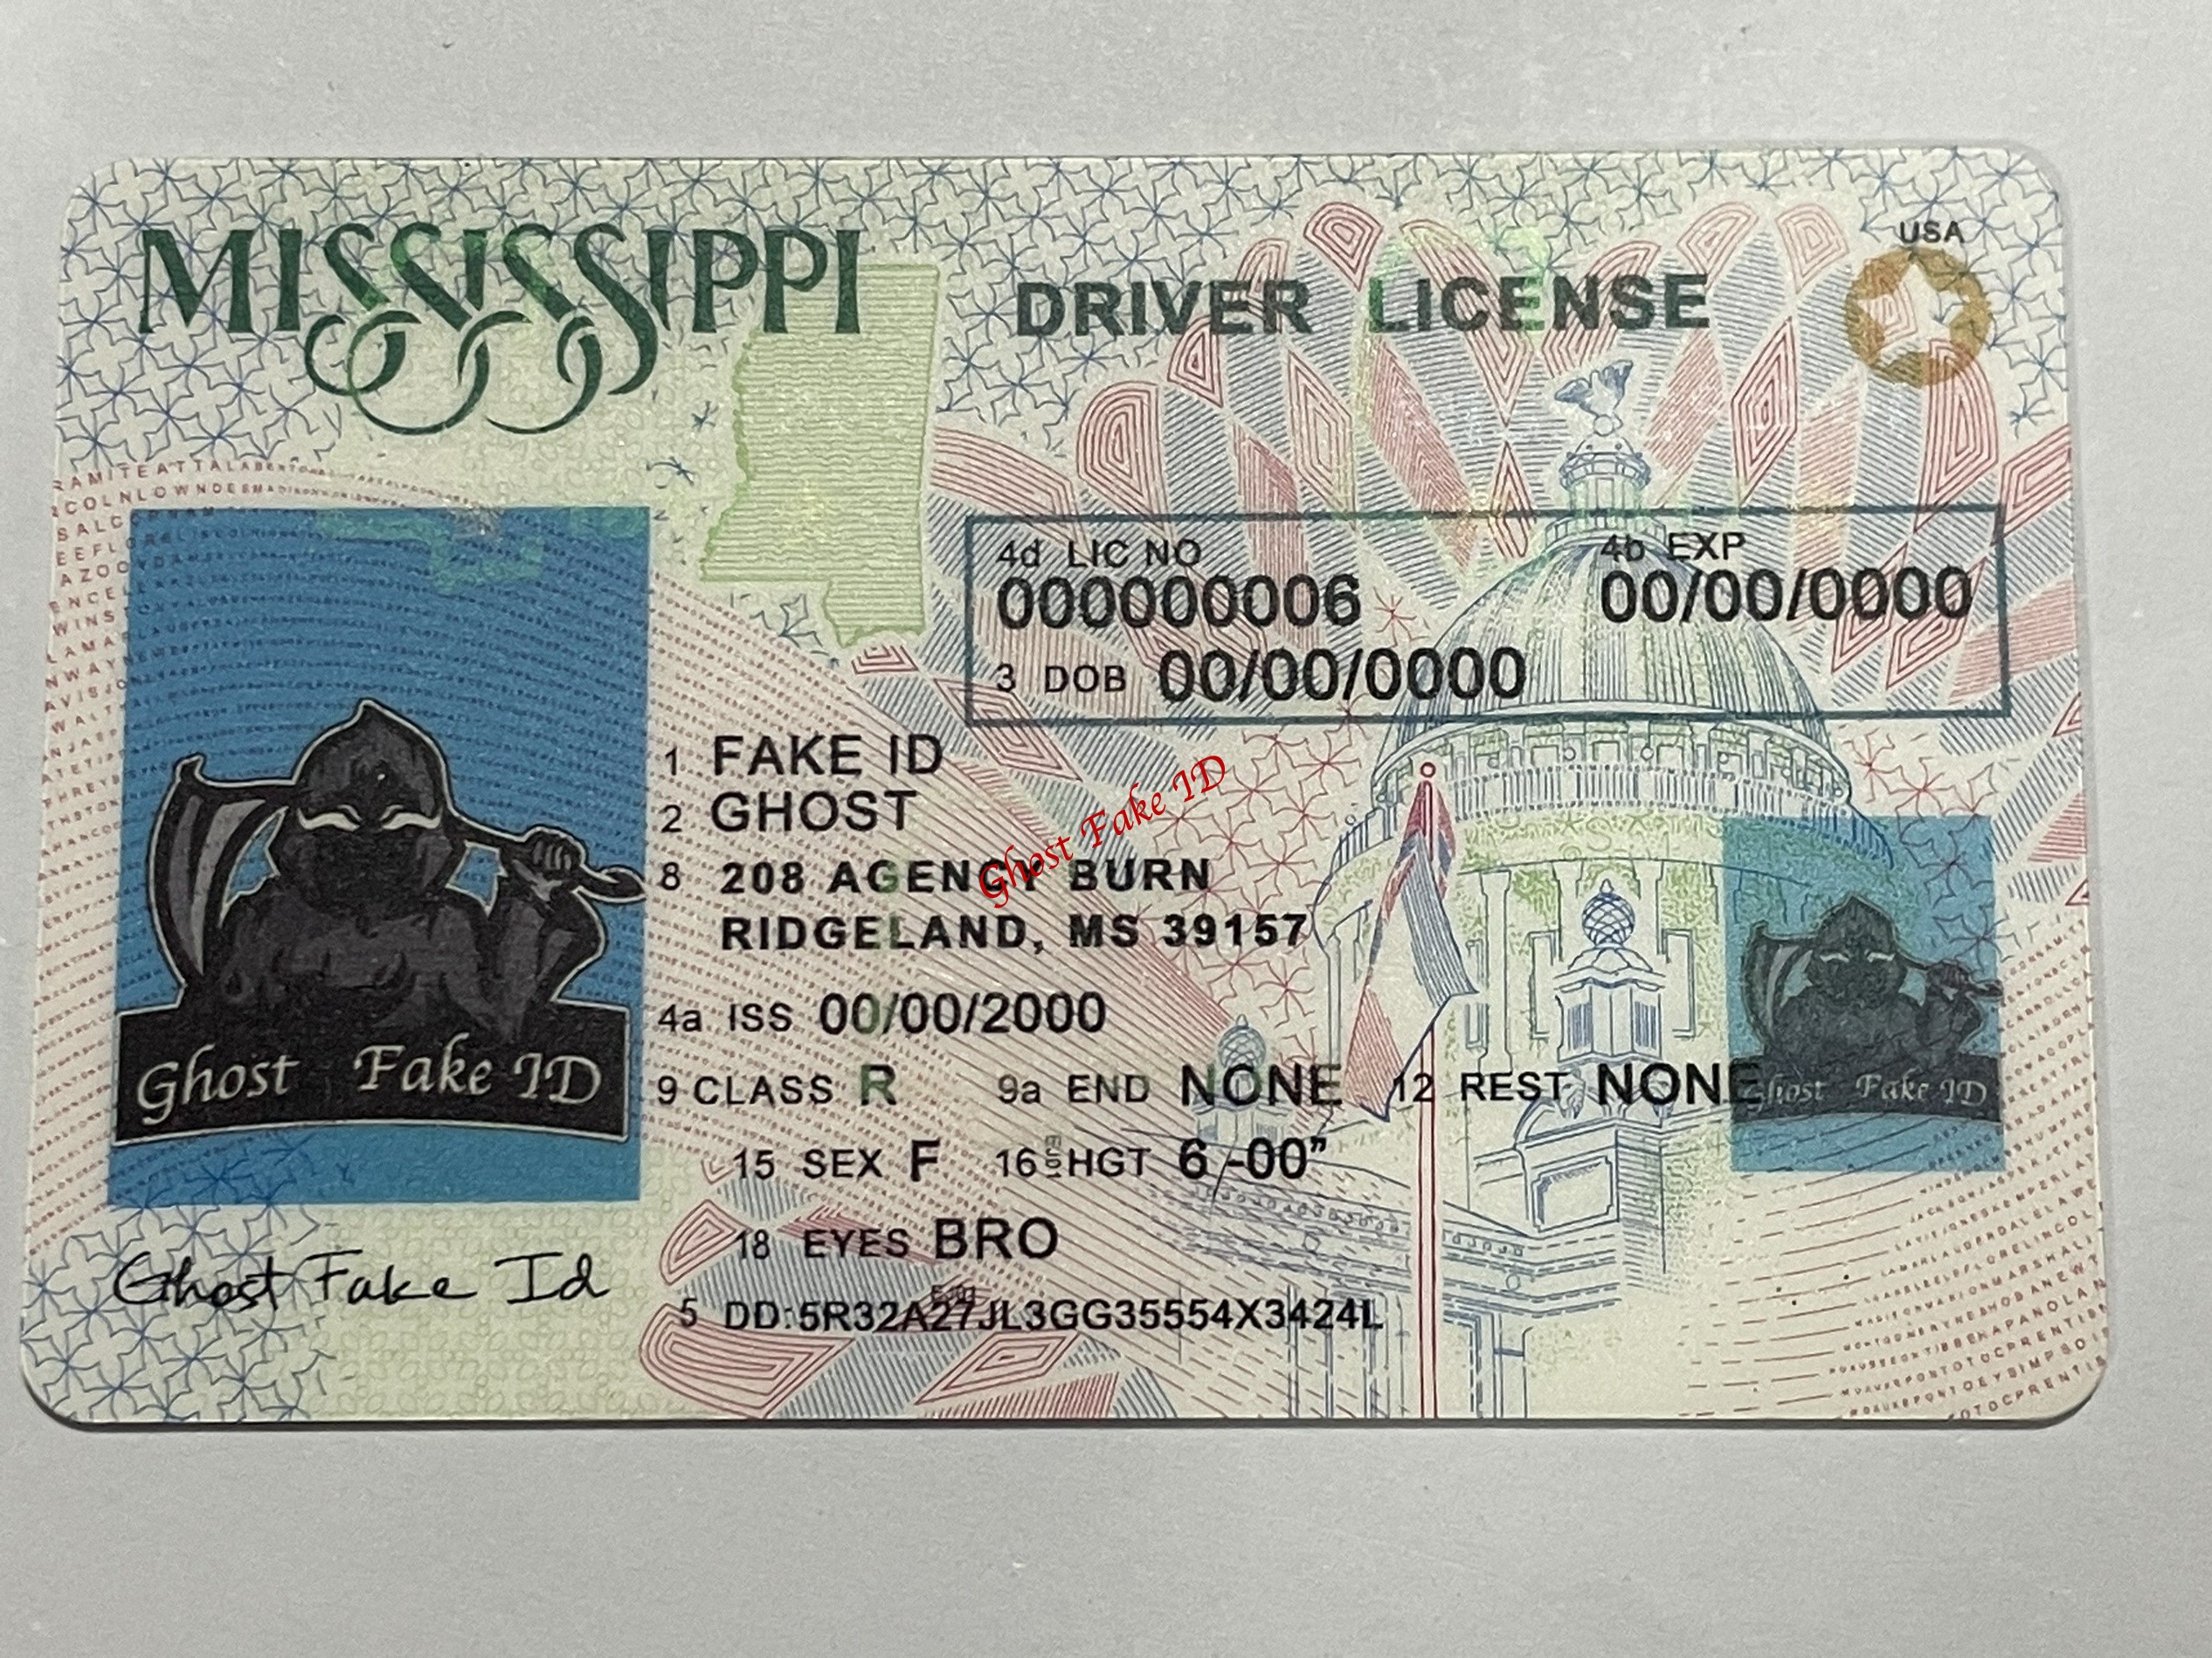 Mississippi - Scanable fake id